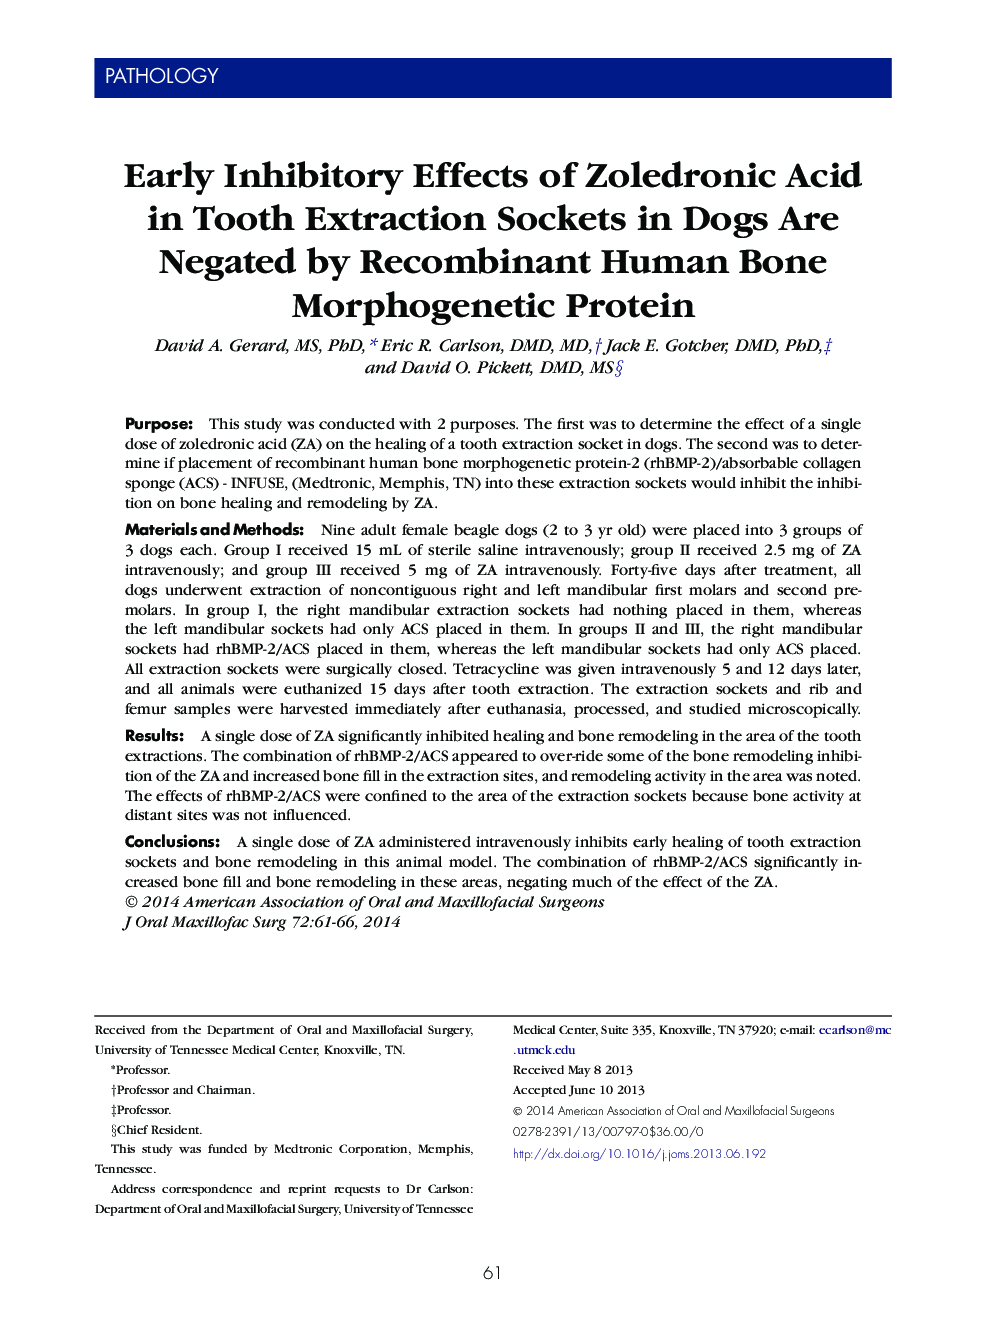 Early Inhibitory Effects of Zoledronic Acid in Tooth Extraction Sockets in Dogs Are Negated by Recombinant Human Bone Morphogenetic Protein